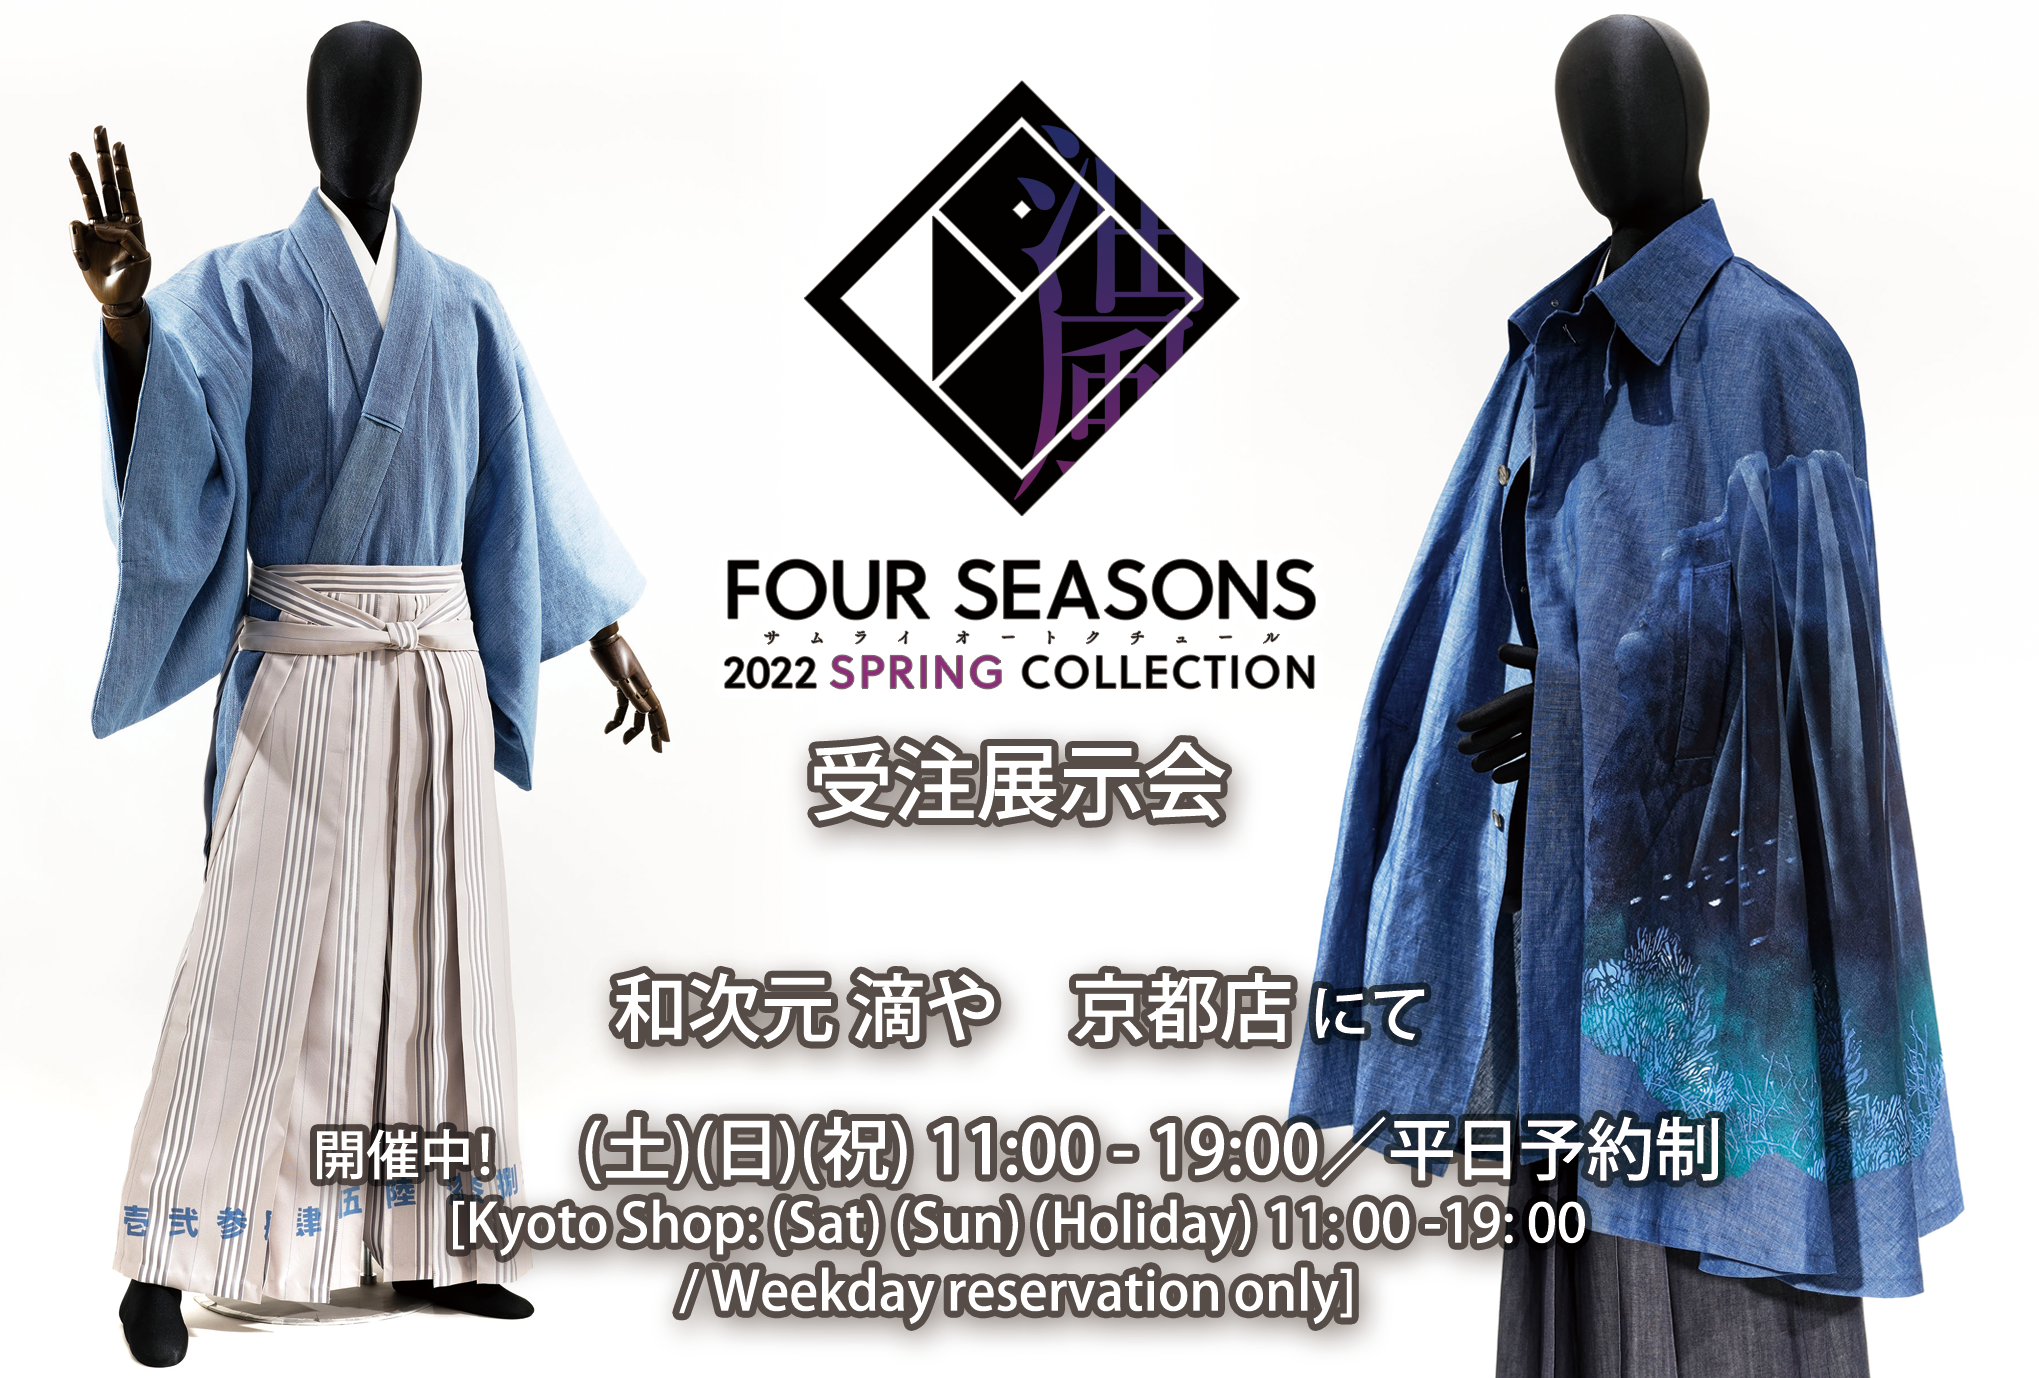 ’22 Spring Collection 受注展示